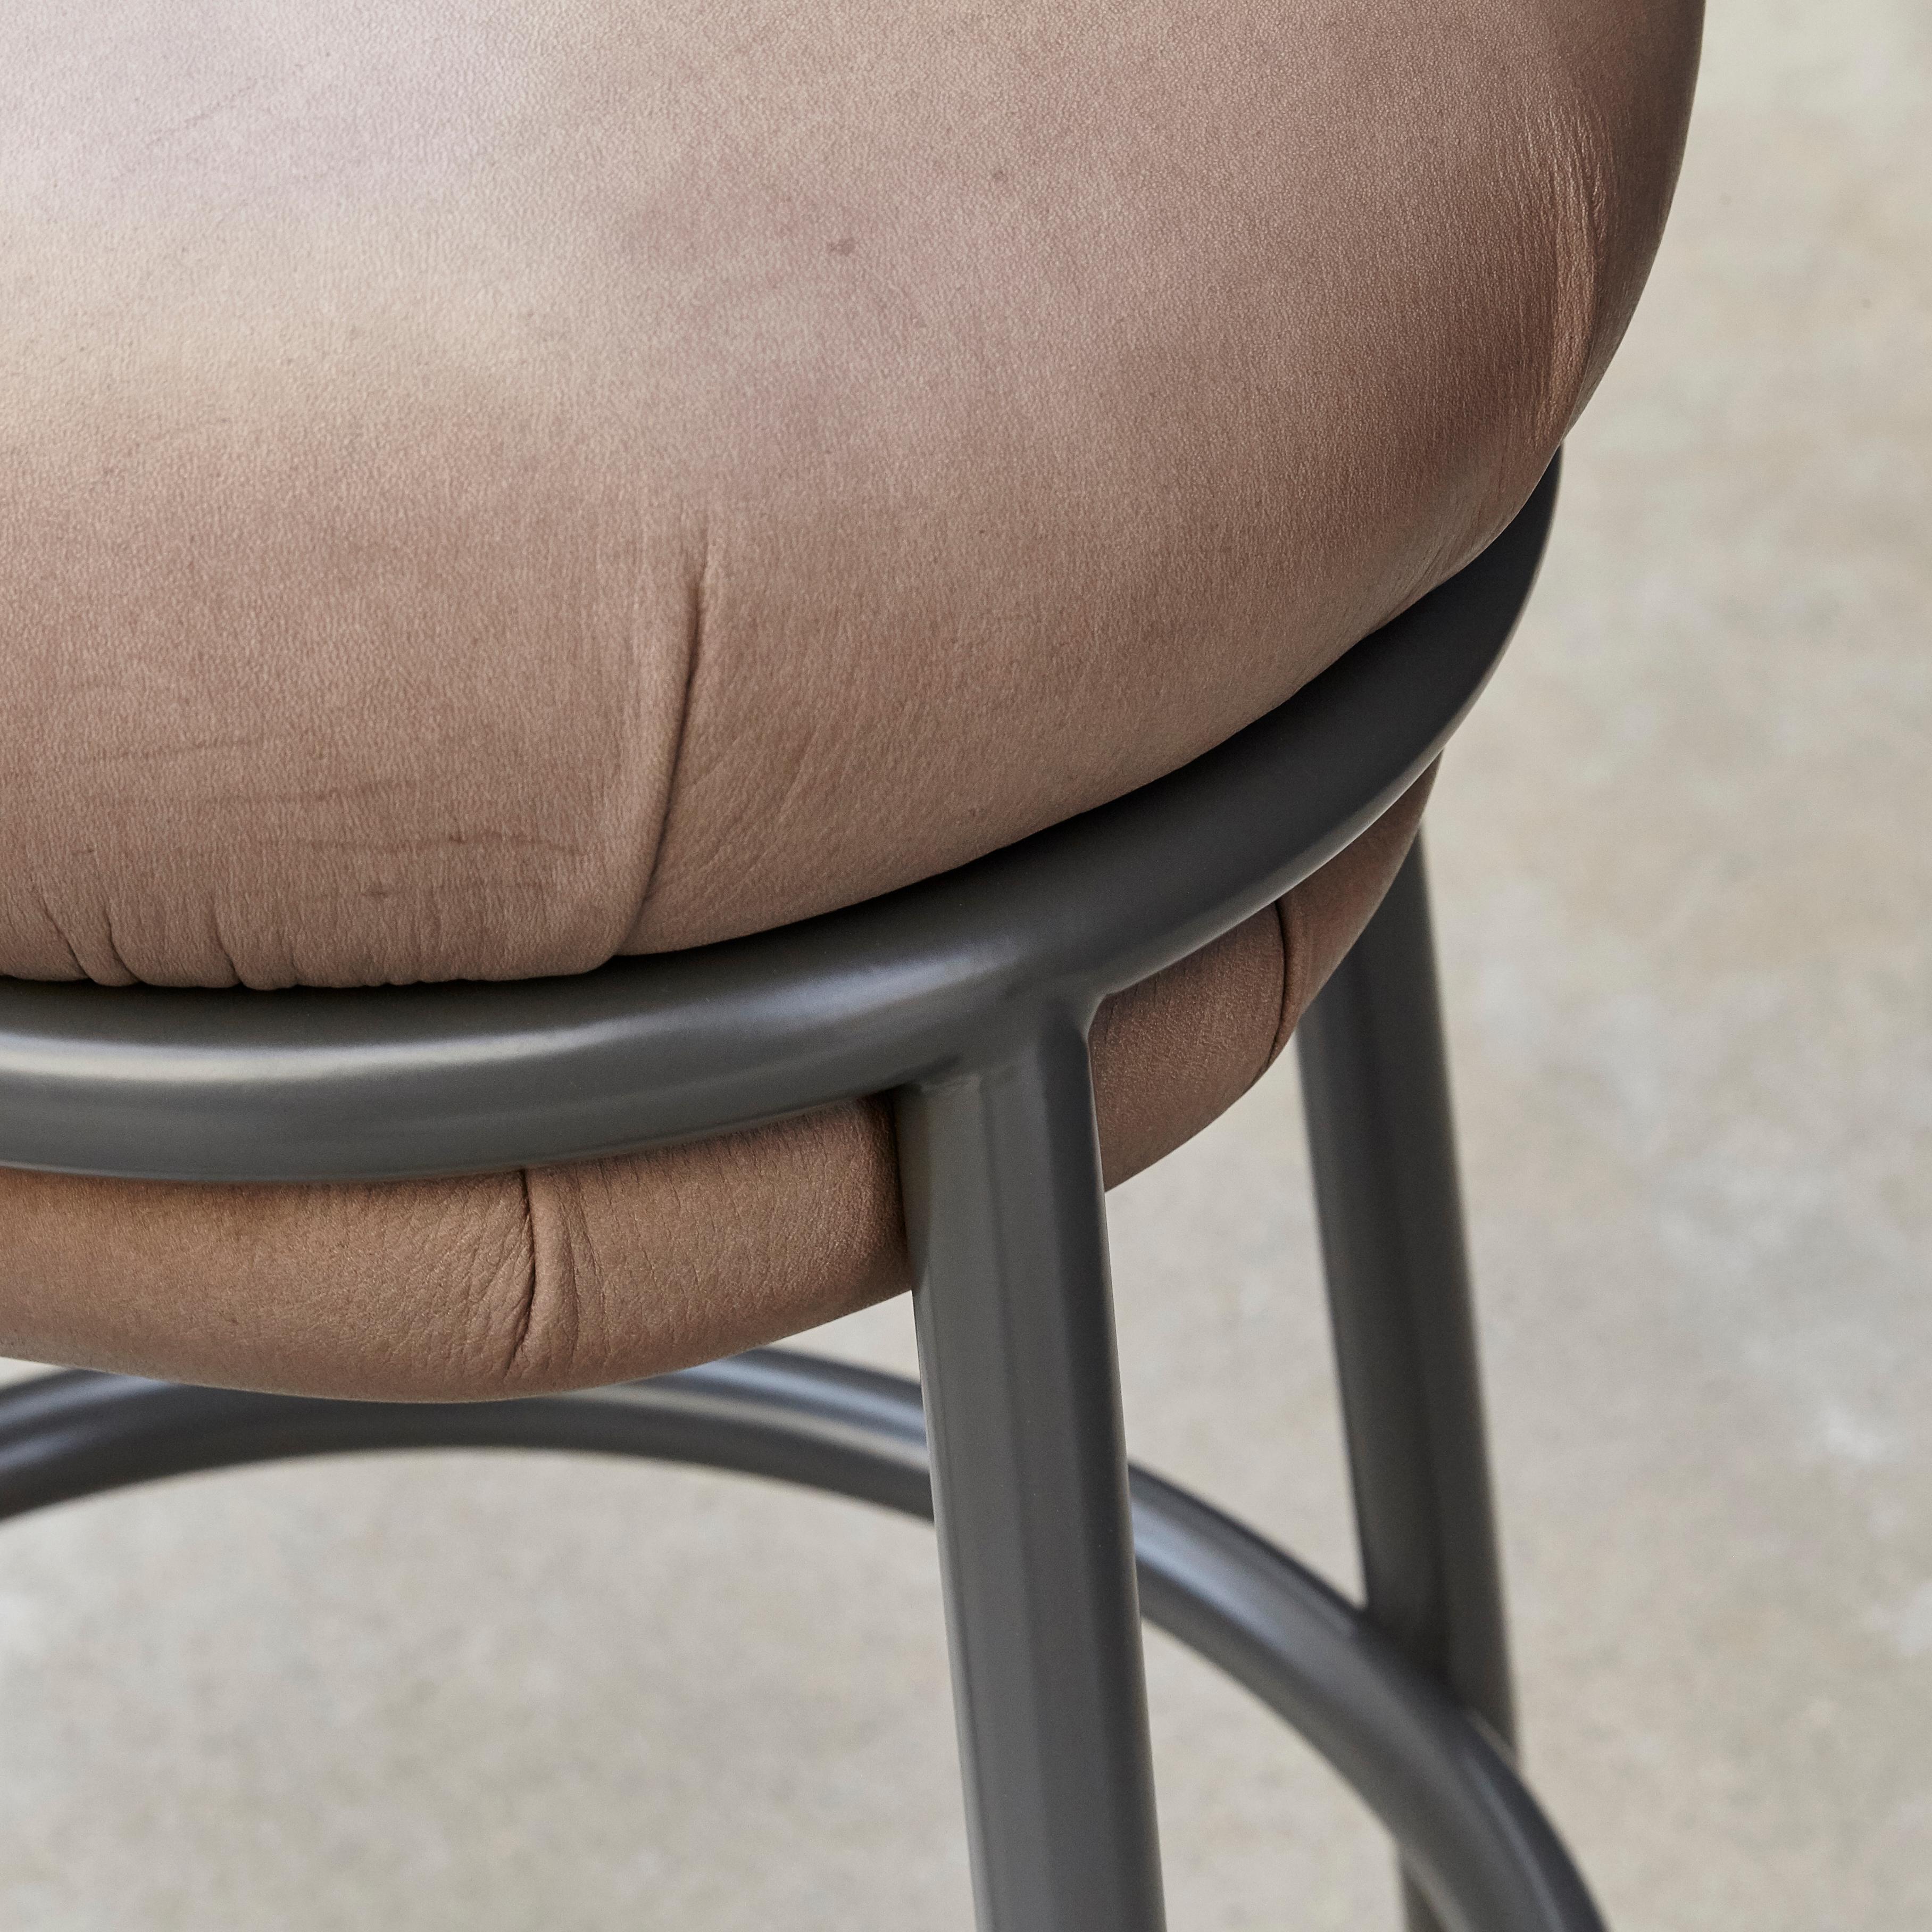 Grasso Contemporary Leather and Lacquered Metal Stool by Stephen Burks in Brown 5